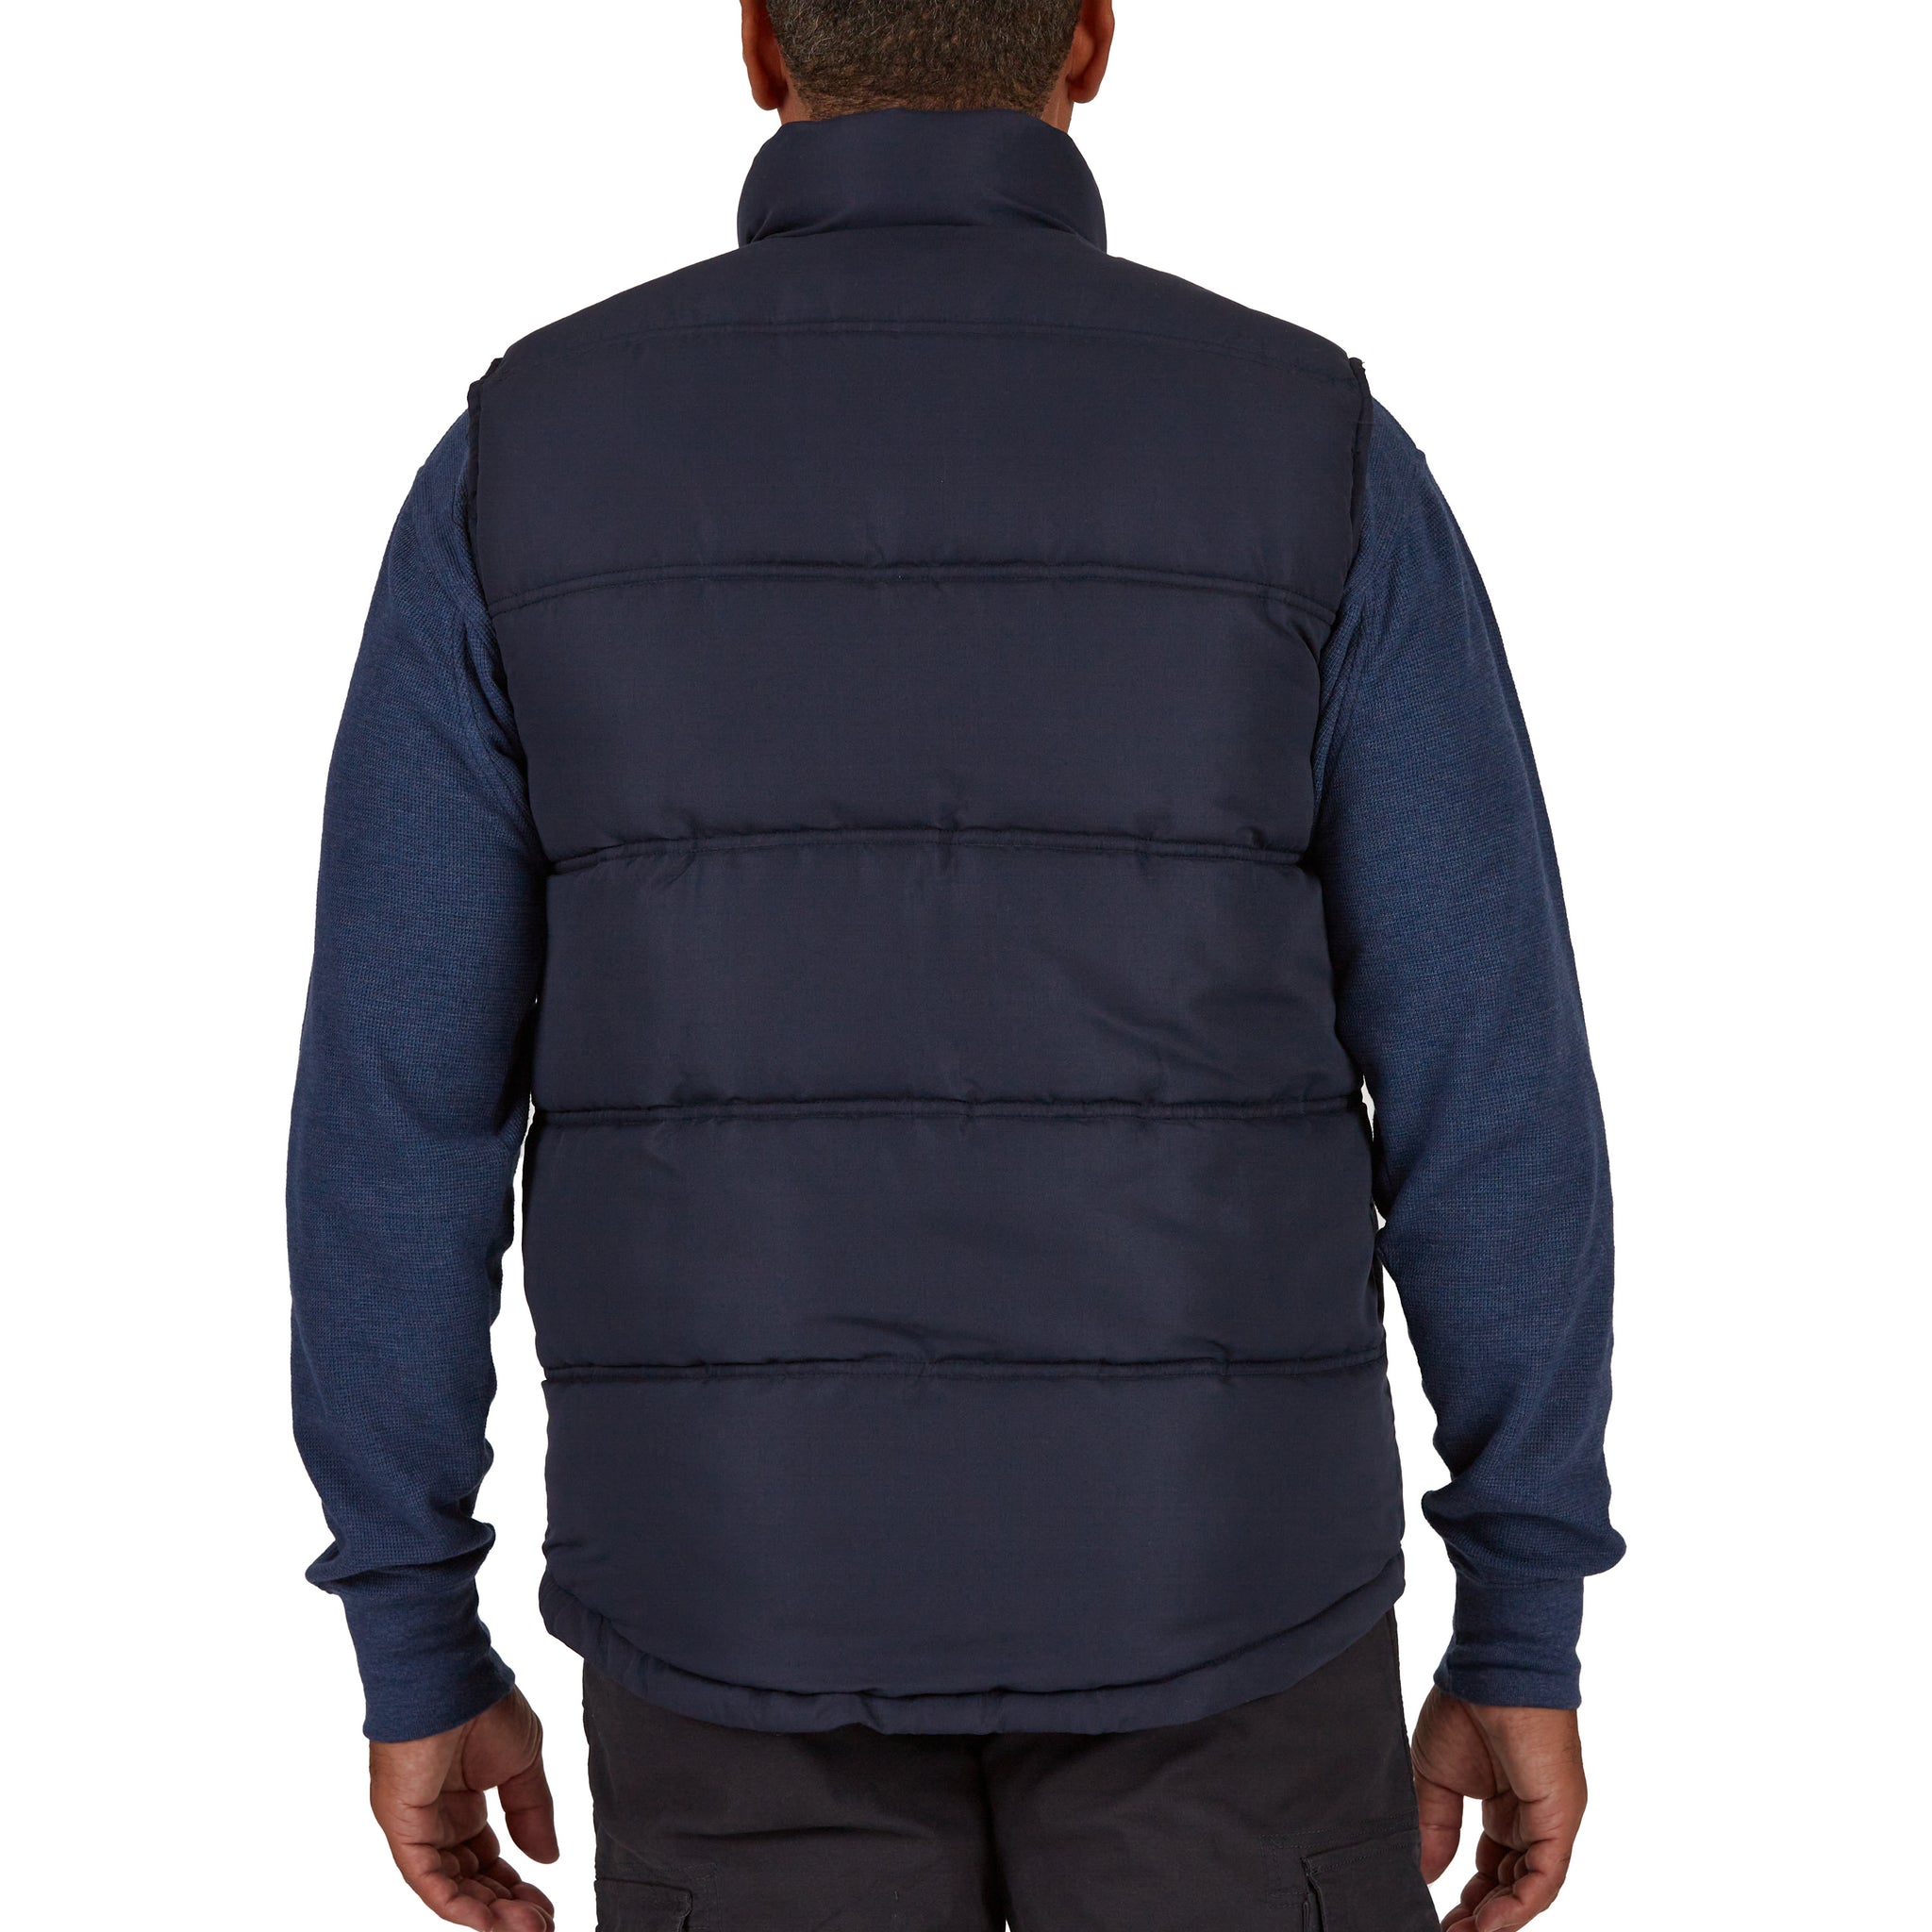 DOUBLE-INSULATED PUFFER VEST